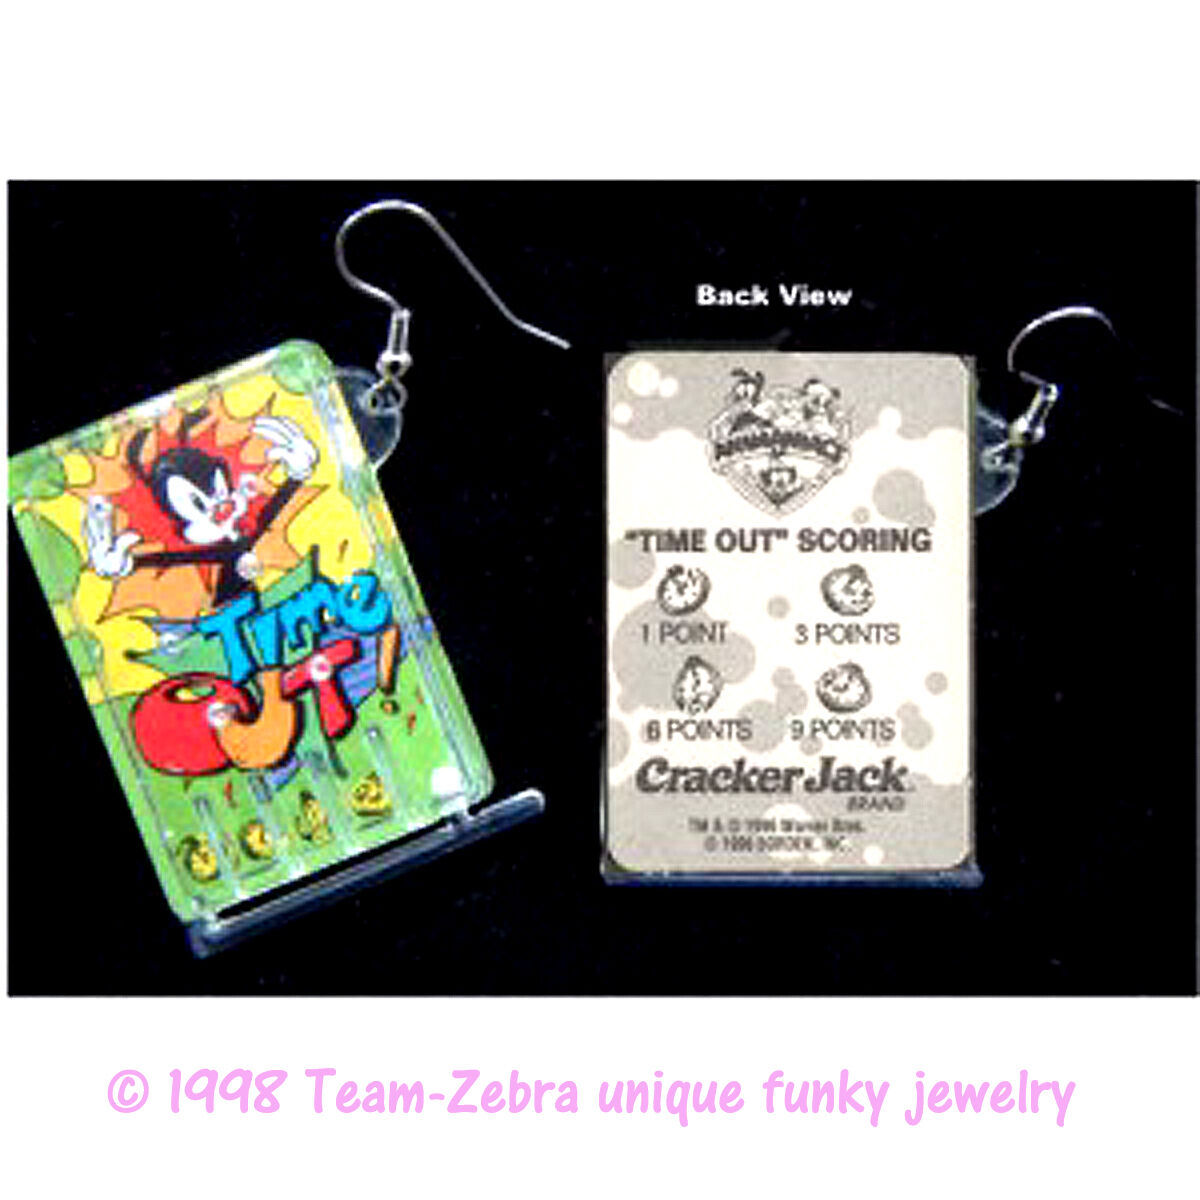 Huge Funky ANIMANIACS PINBALL GAME EARRINGS-Vintage Cracker Jack prizes-TIME OUT - $7.83